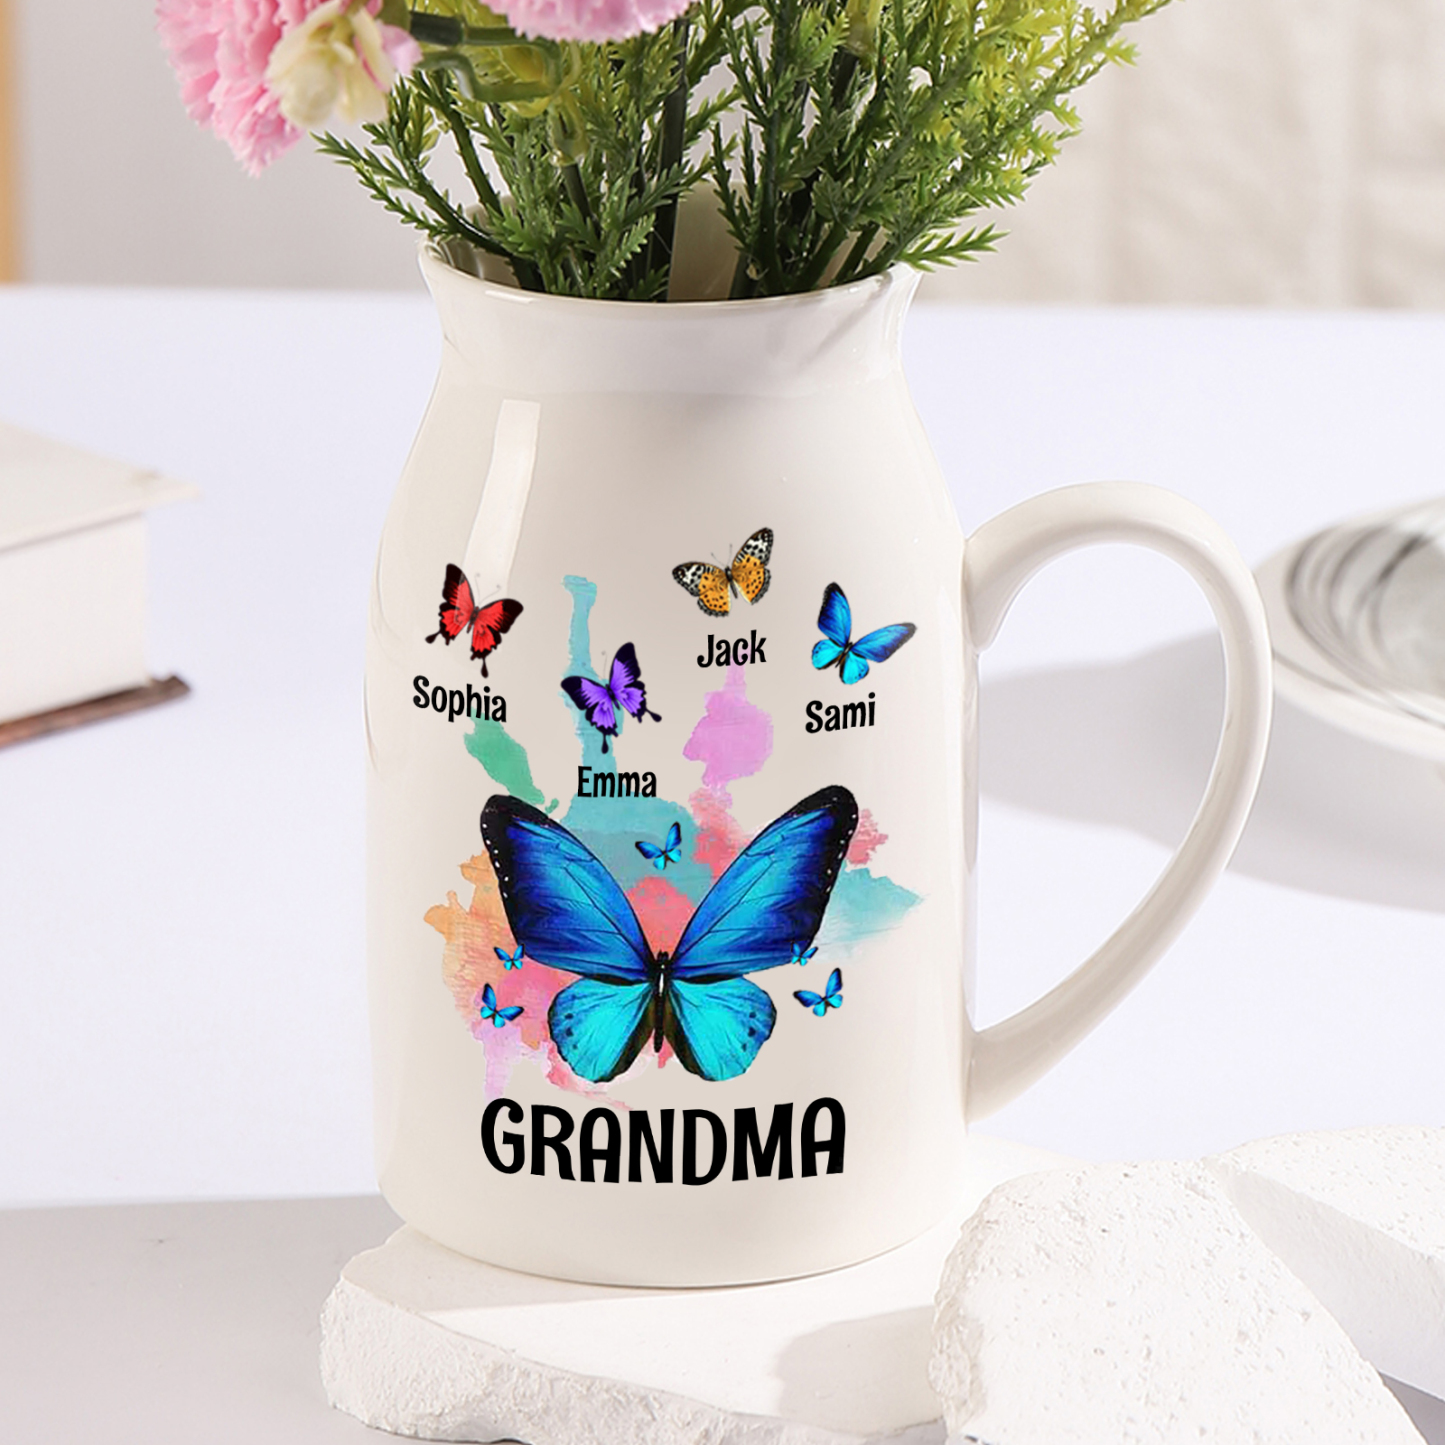 4 Names - Personalized Beautiful Colorful Butterfly Style Ceramic Vase with Customizable Names As a Wonderful Gift For Grandma